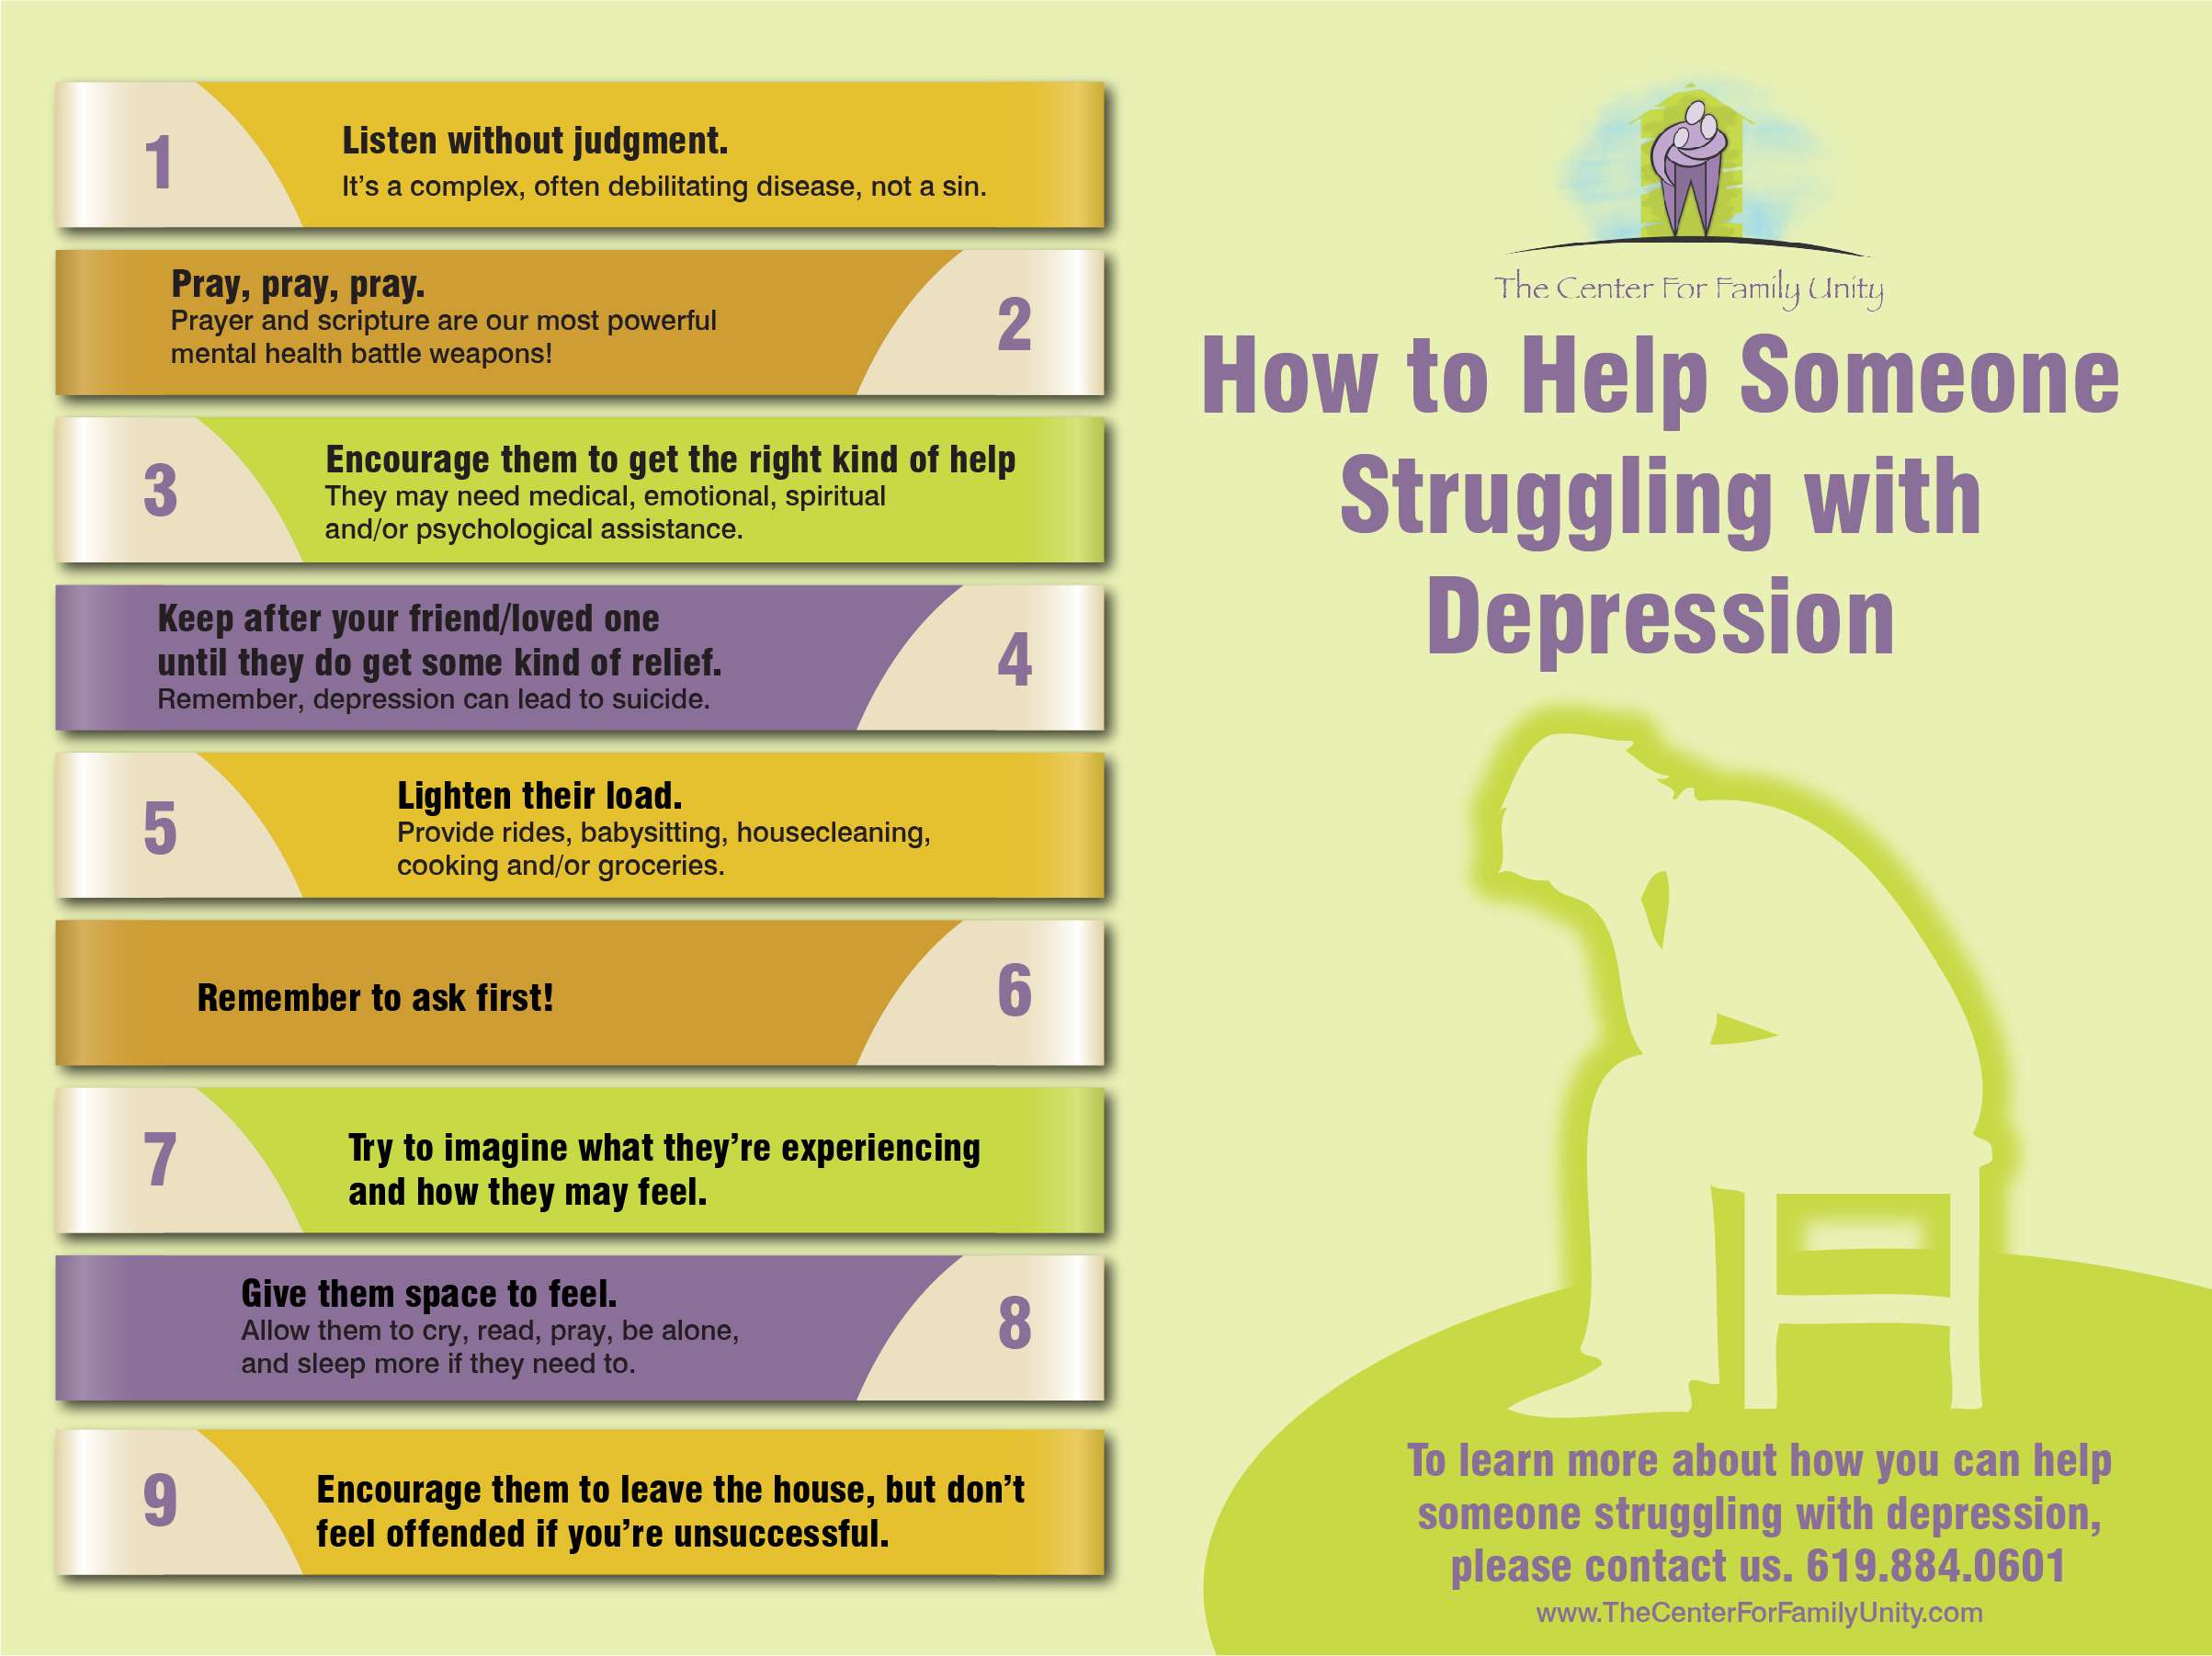 How to Help Someone Struggling with Depression